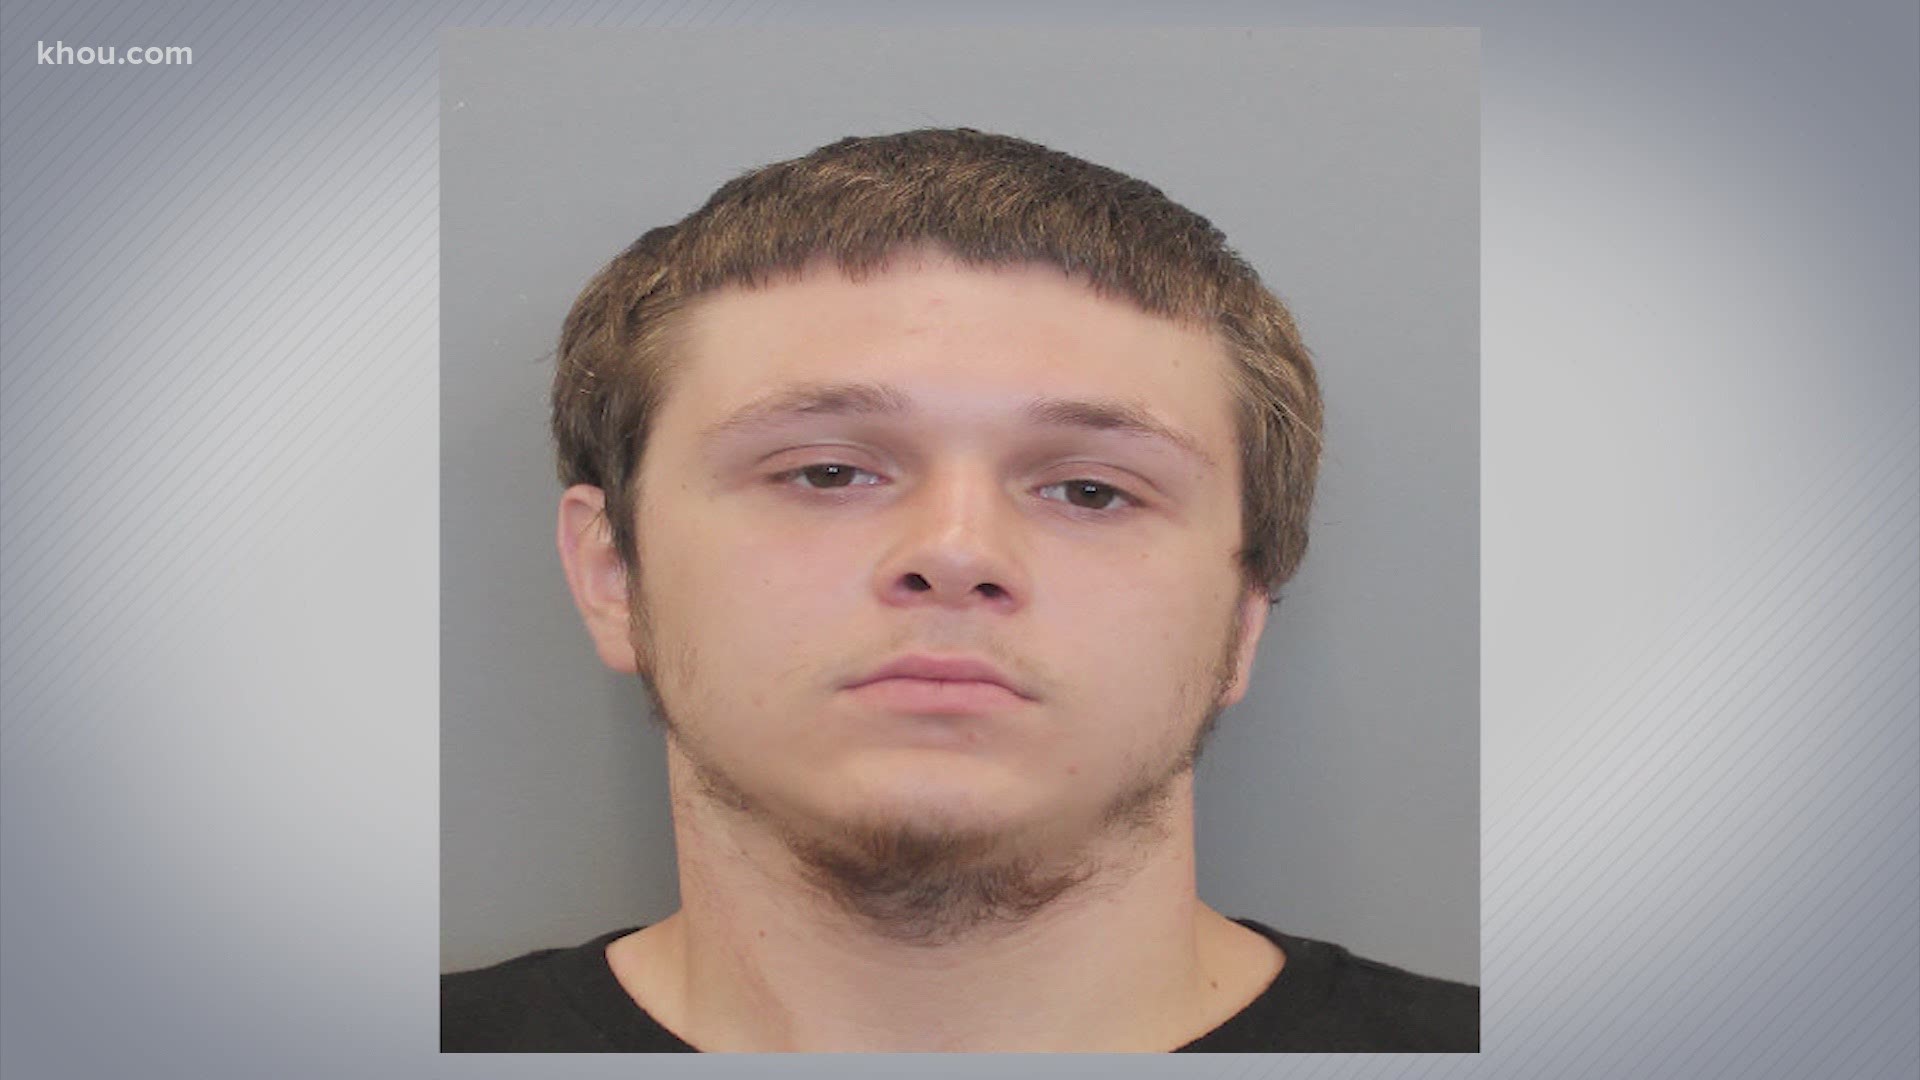 Gregory Donnell is charged with capital murder and aggravated robbery in connection with the shooting death of 40-year-old Margarita Villa.